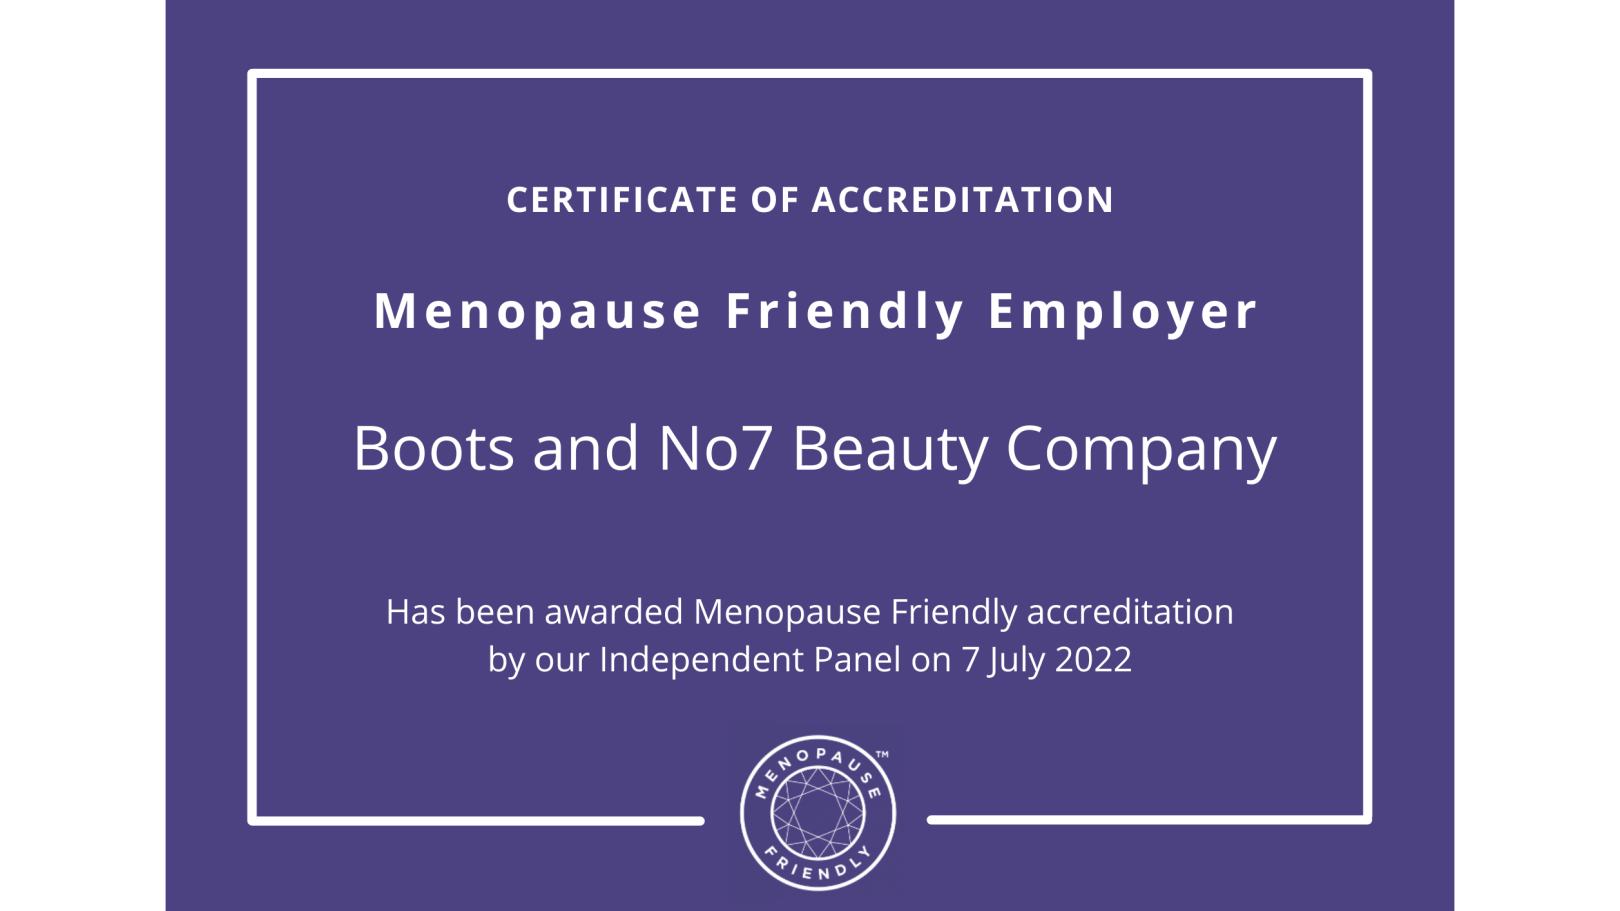 Boots UK - Accredited Menopause Friendly Employer 2023